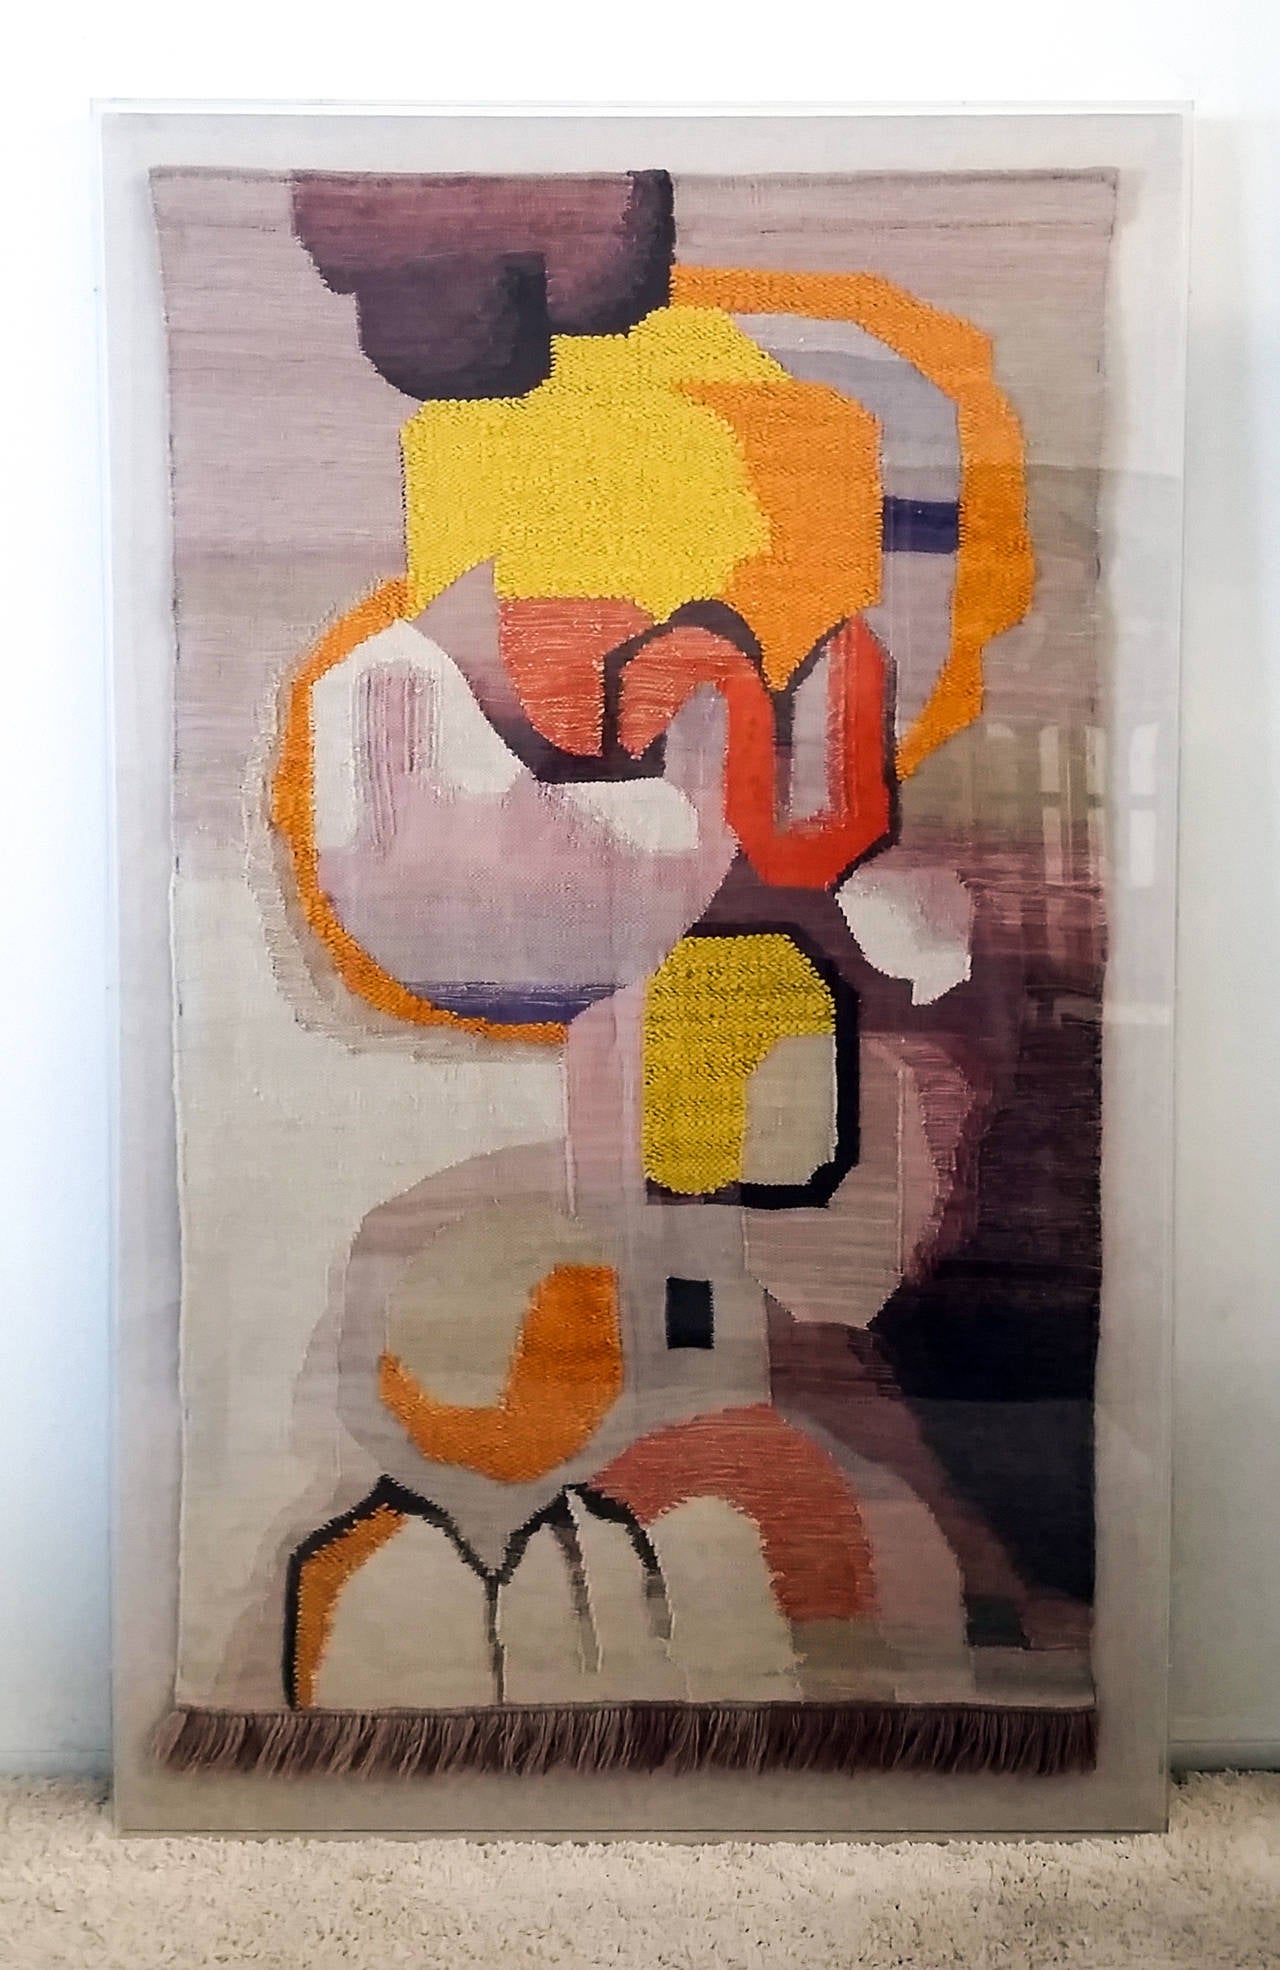 An incredible piece; this tapestry features bold colors and a great Mid-Century abstract design. The tapestry is in mint condition and was professionally framed on a canvas backing enclosed within an acrylic box frame. 

There is one very small